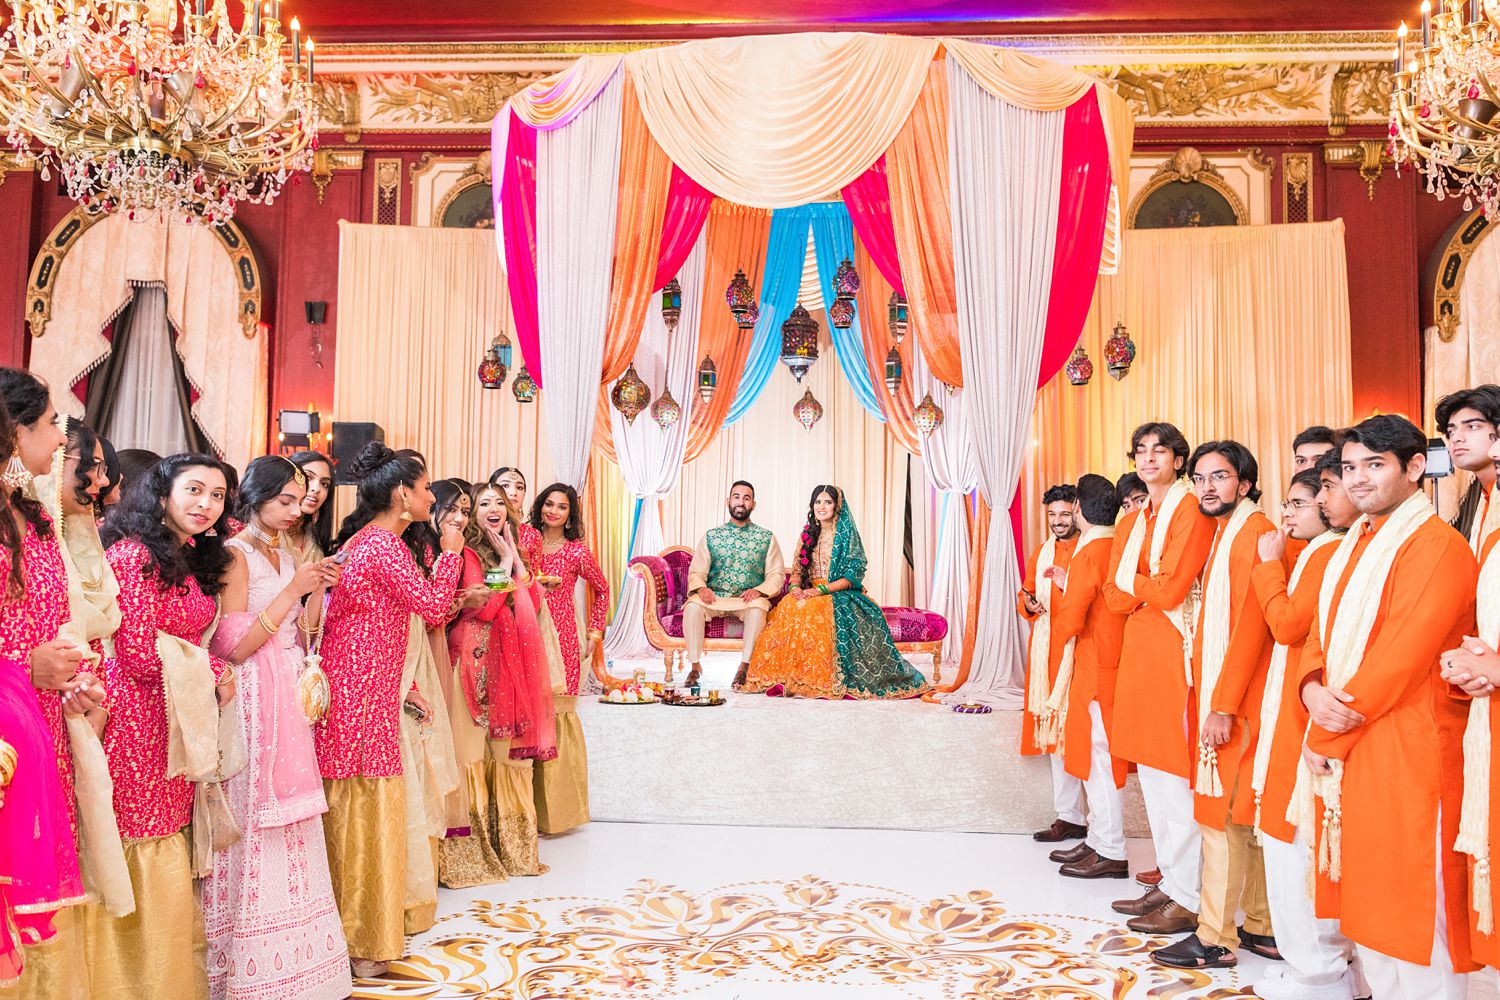 Pakistani Bride and Groom at Mehndi Party with their friends and family at Palmer House wedding. Photographed by Maha Studios